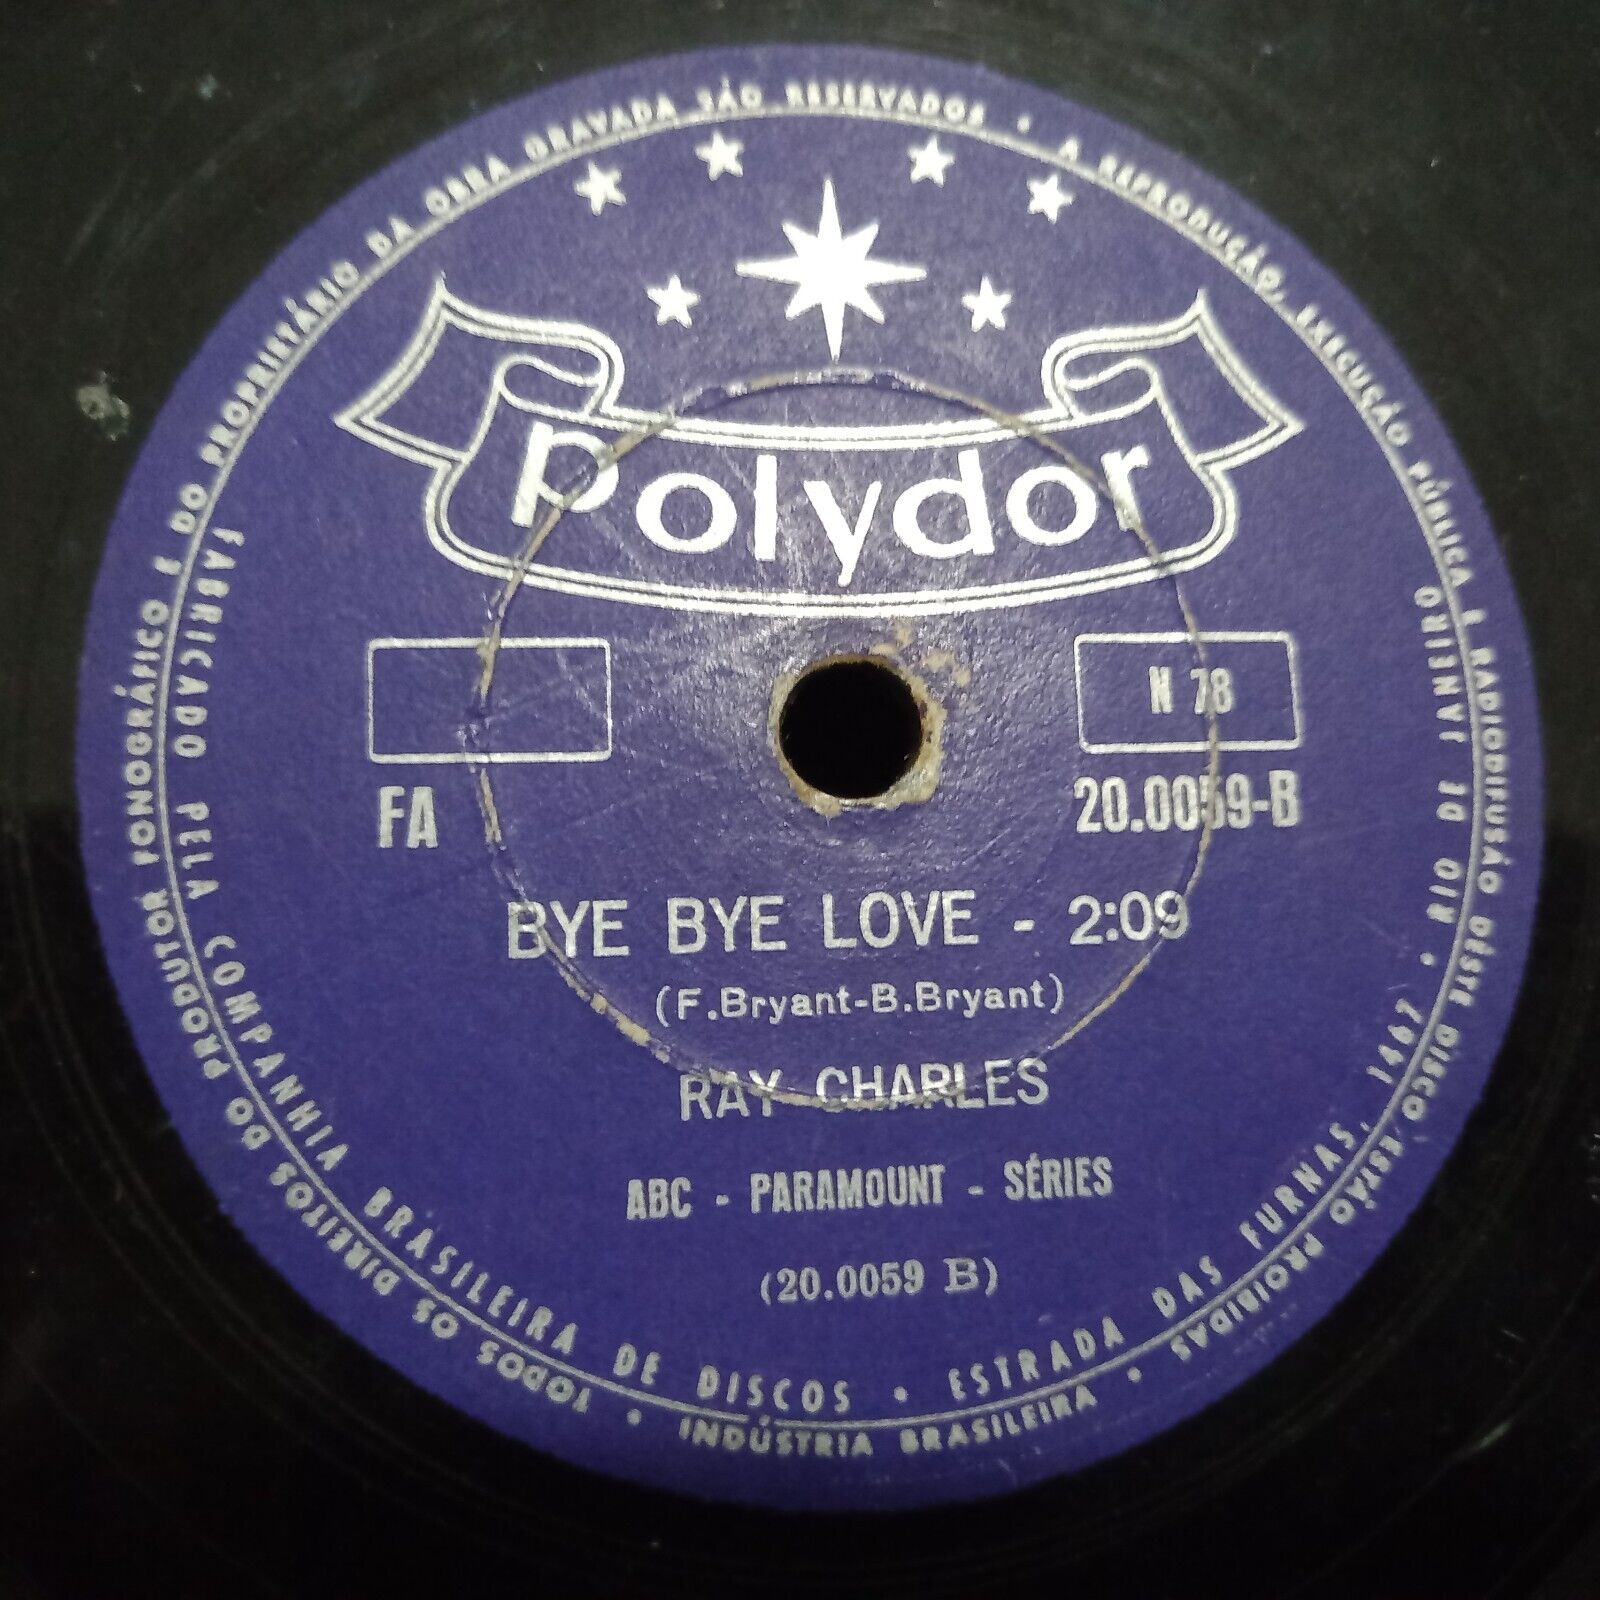 Pic 4 10" RAY CHARLES 78 RPM "I CAN'T STOP LOVING YOU" + "BYE BYE LOVE" BRAZIL 1962 VG